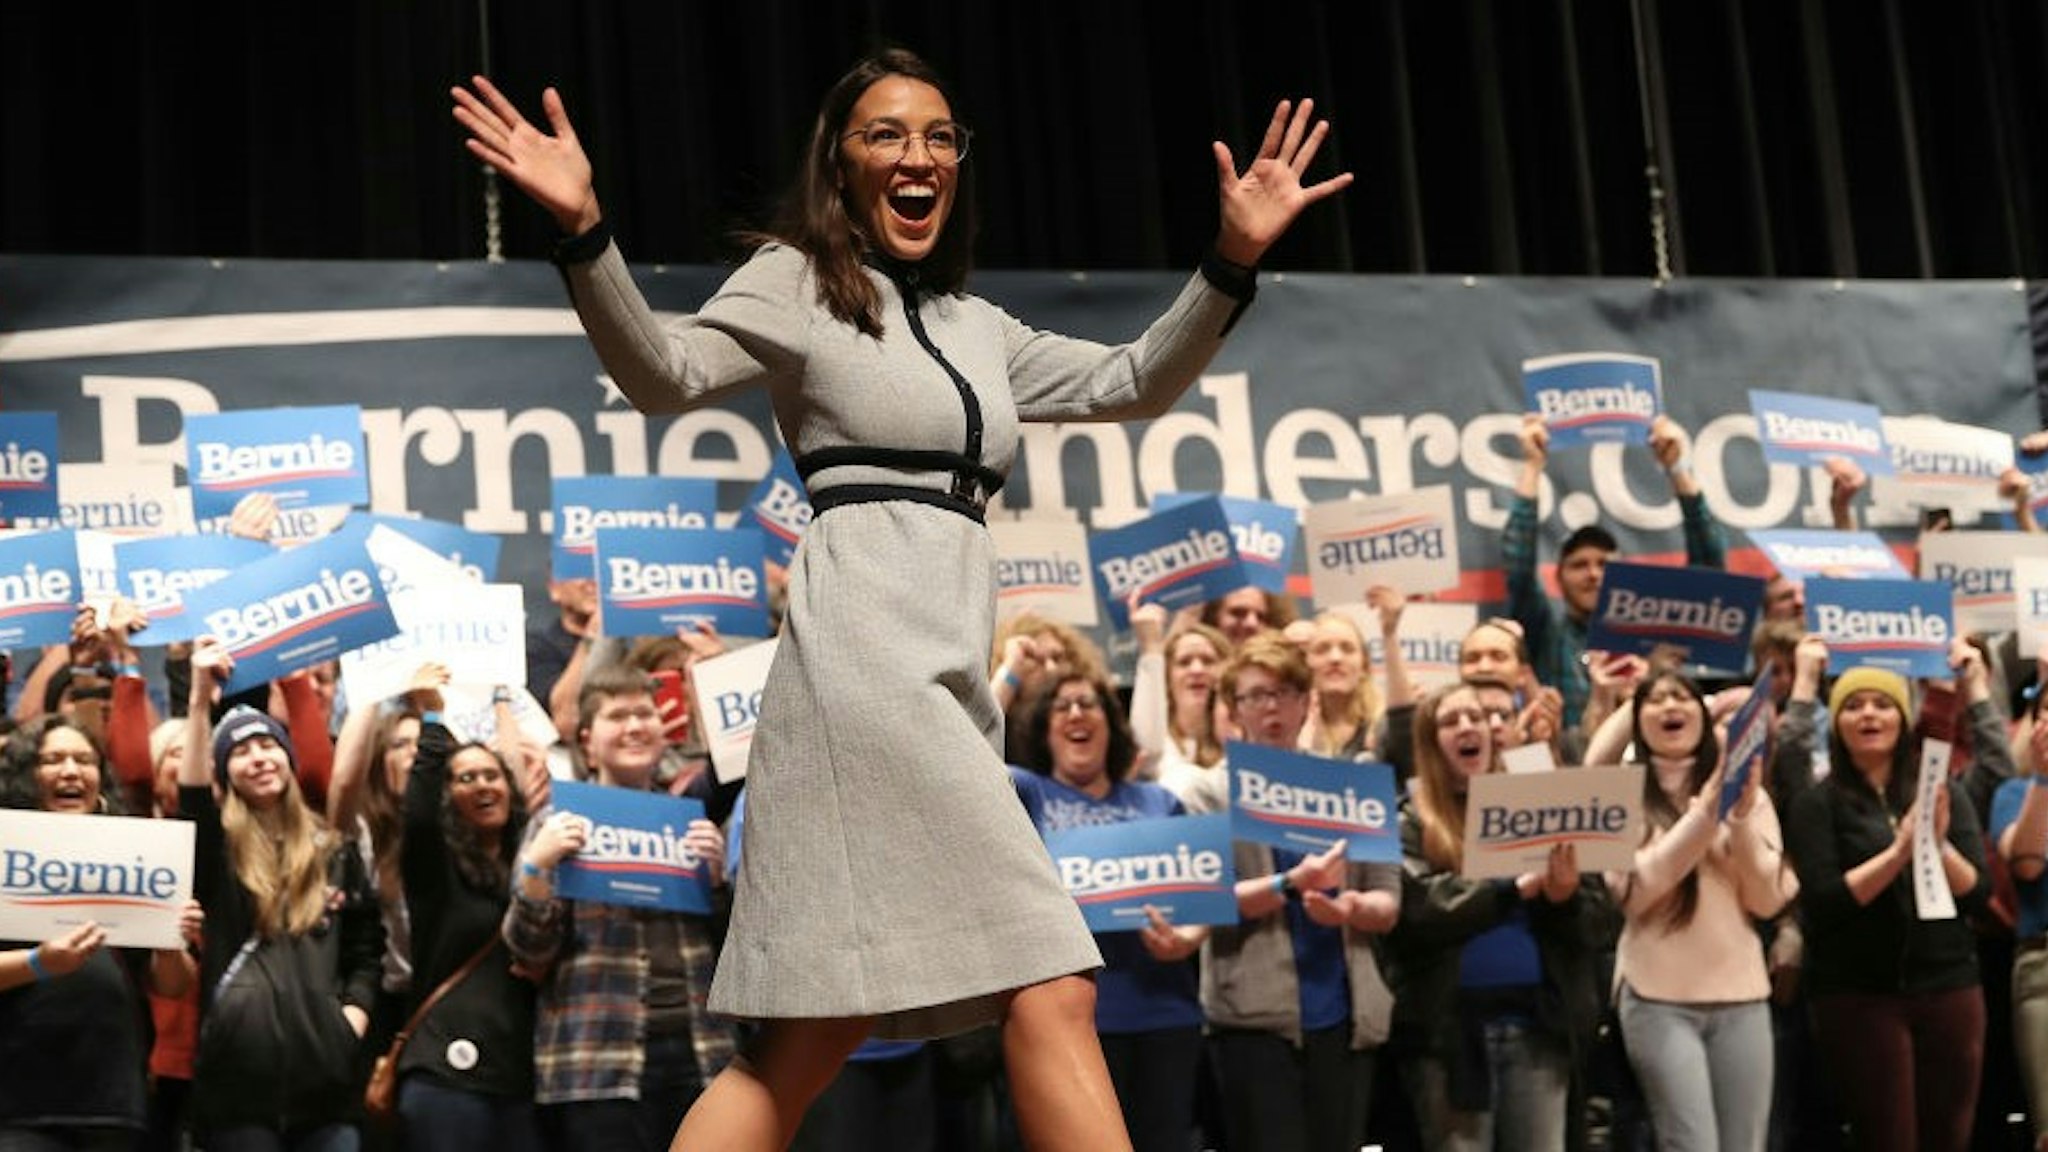 AMES, IOWA - JANUARY 25: Rep. Alexandria Ocasio-Cortez (D-NY) arrives on stage at a campaign event for Democratic presidential candidate Sen. Bernie Sanders (I-VT) at the Ames City Auditorium on January 25, 2020 in Ames, Iowa. Iowa holds the state's caucuses in nine days on February 3. (Photo by